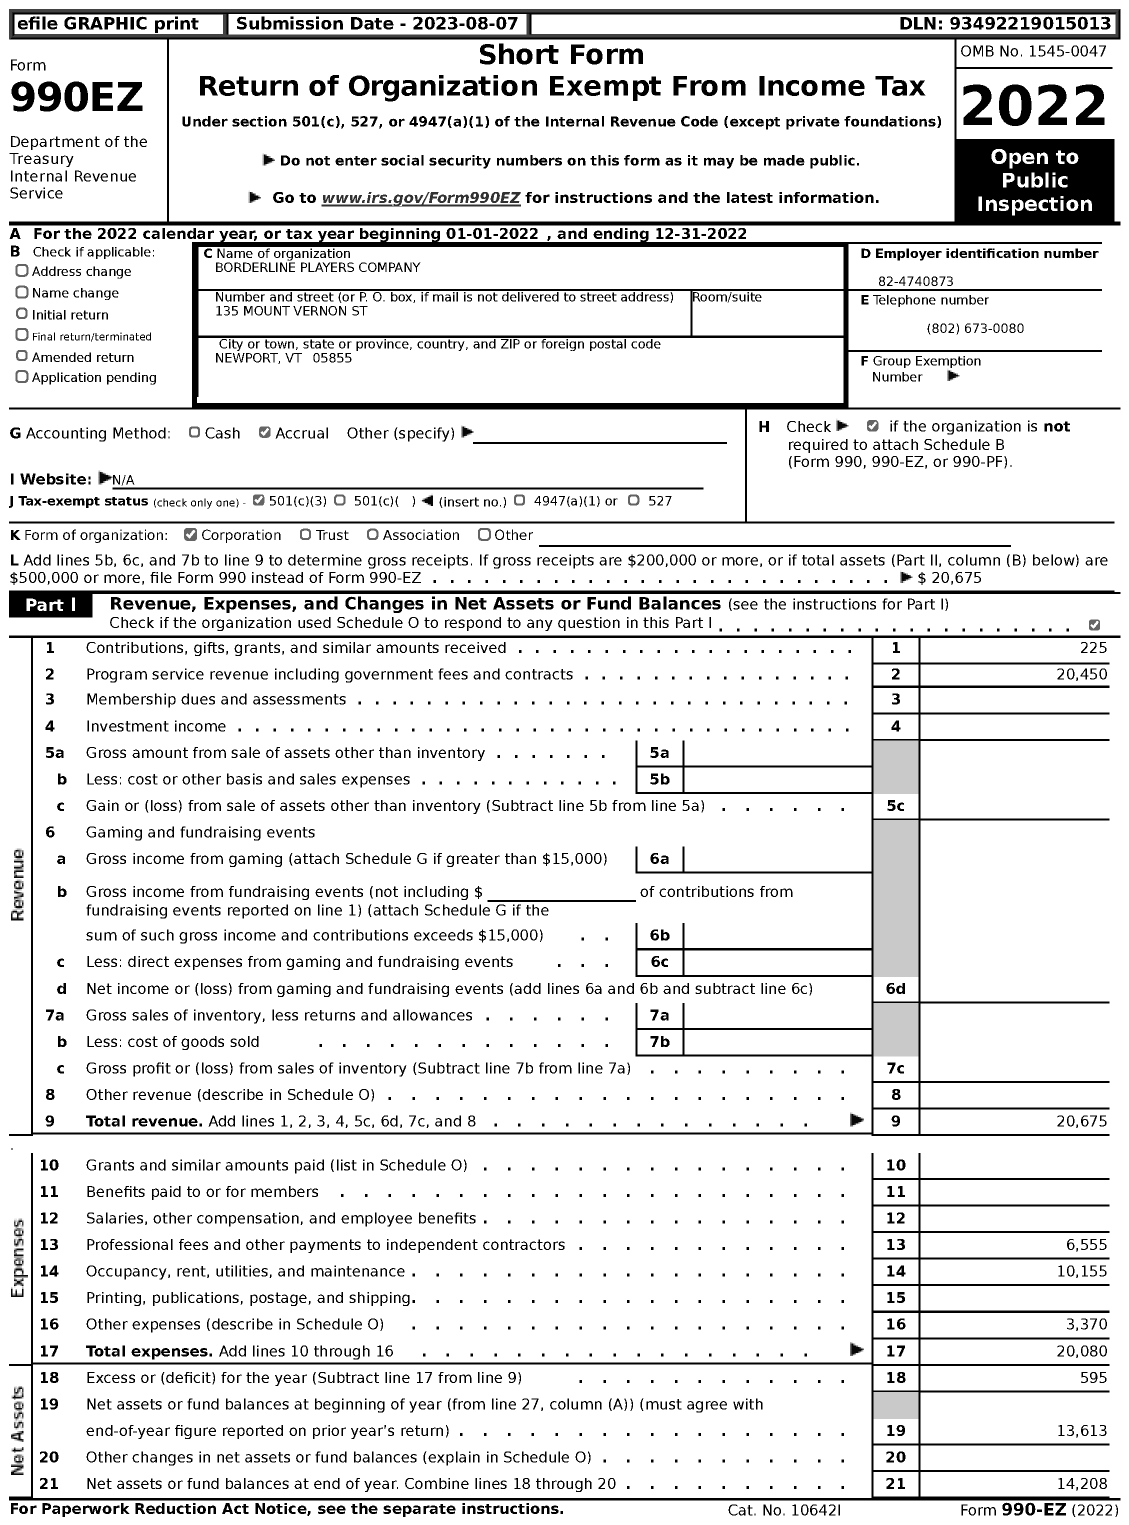 Image of first page of 2022 Form 990EZ for Borderline Players Company